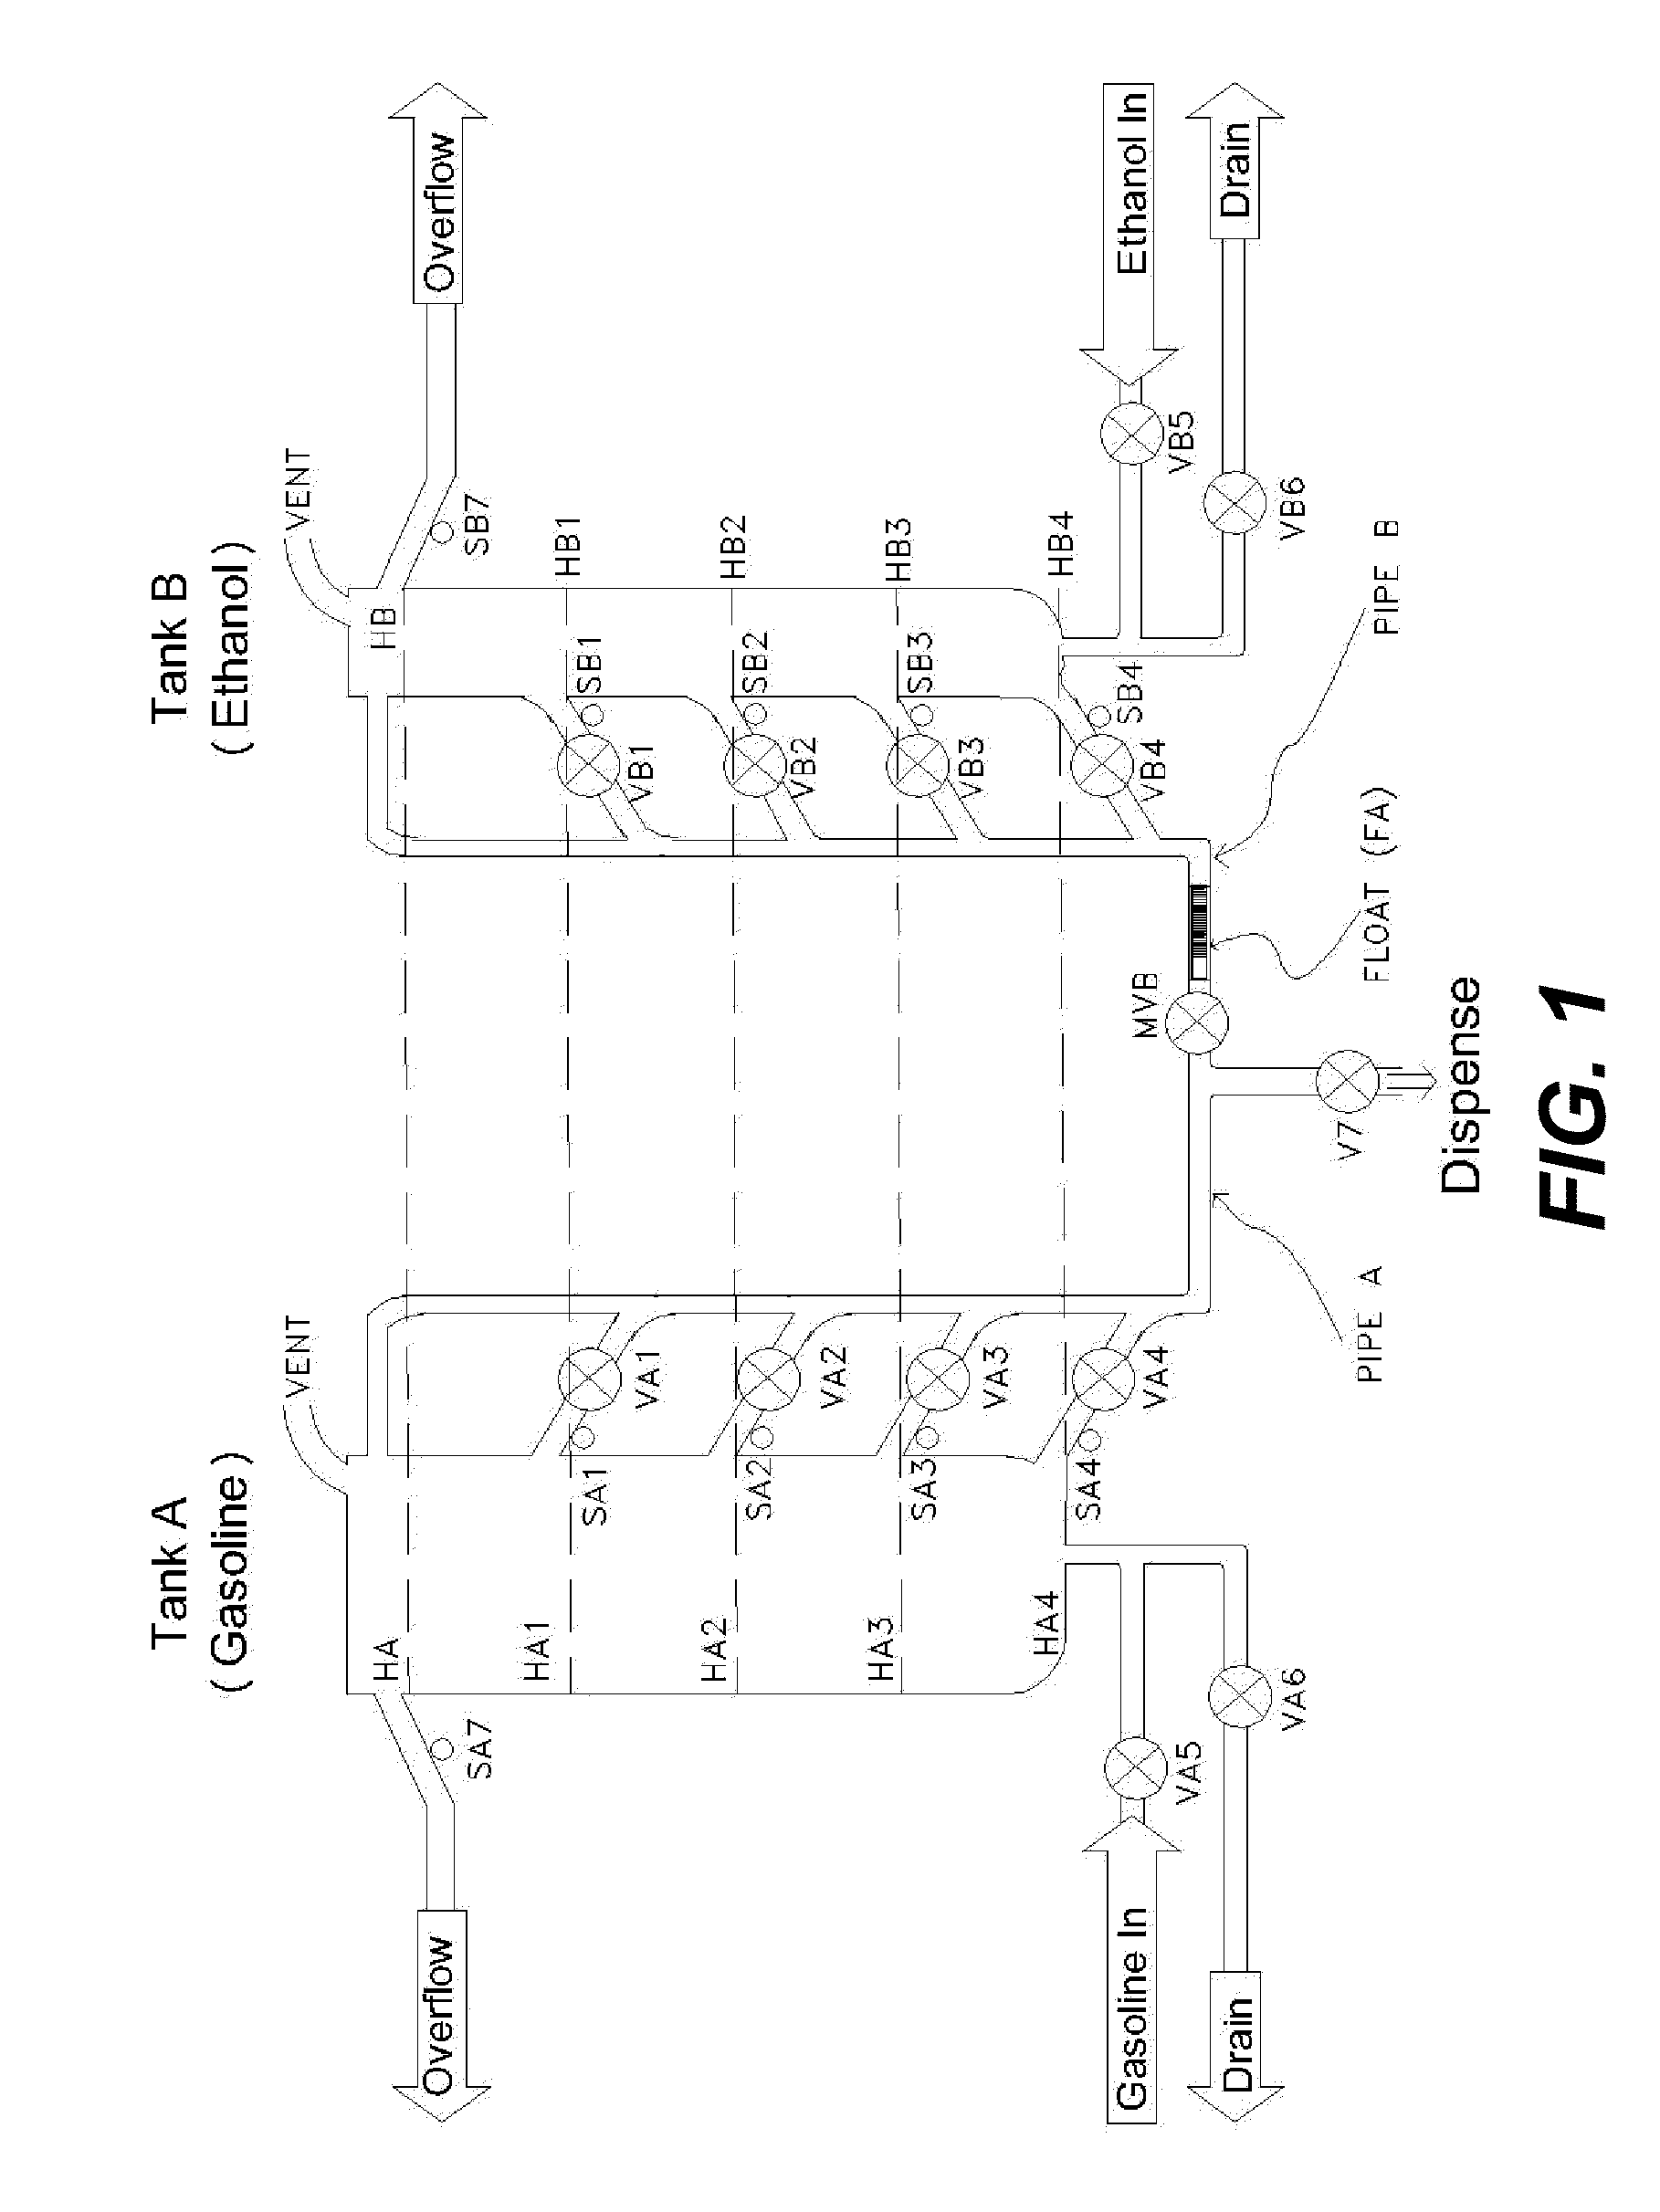 Apparatus and method for synchronized flow from volumetric tanks